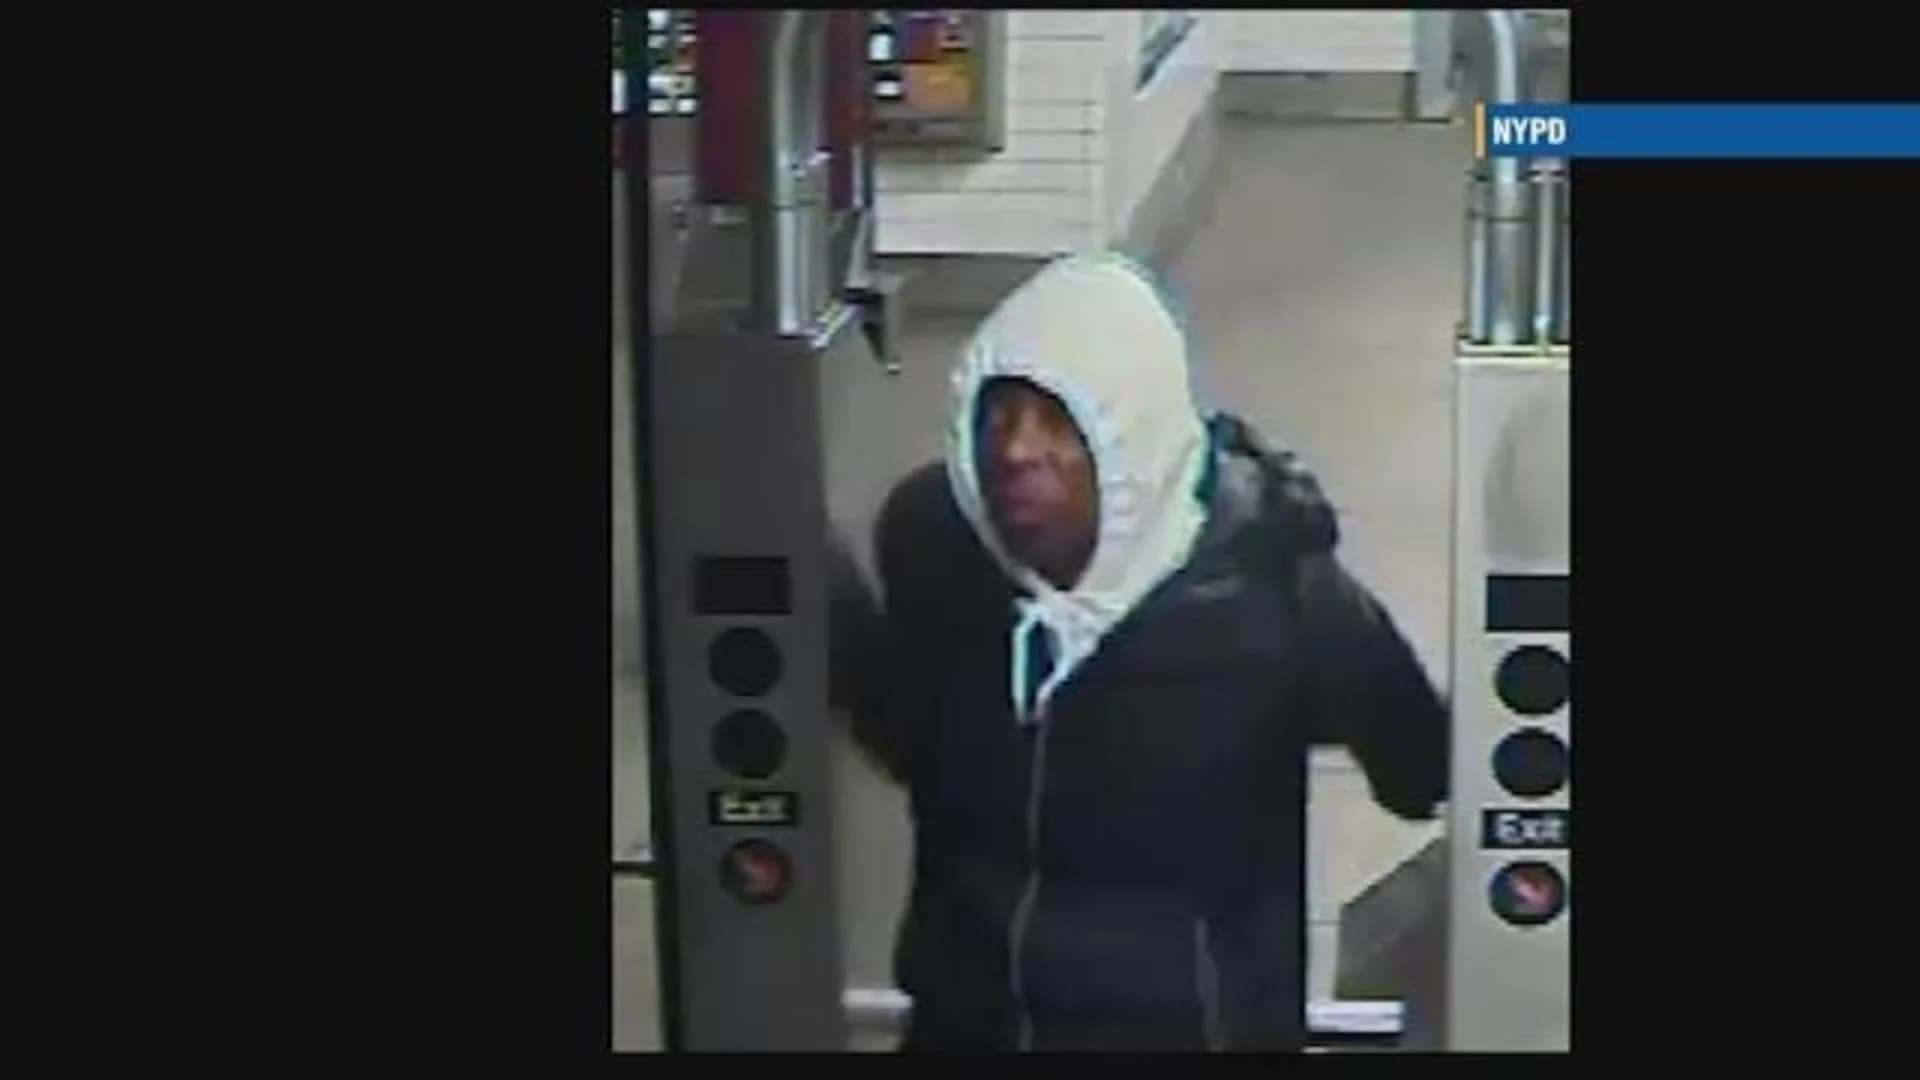 Police: Man holds knife to woman's neck during robbery